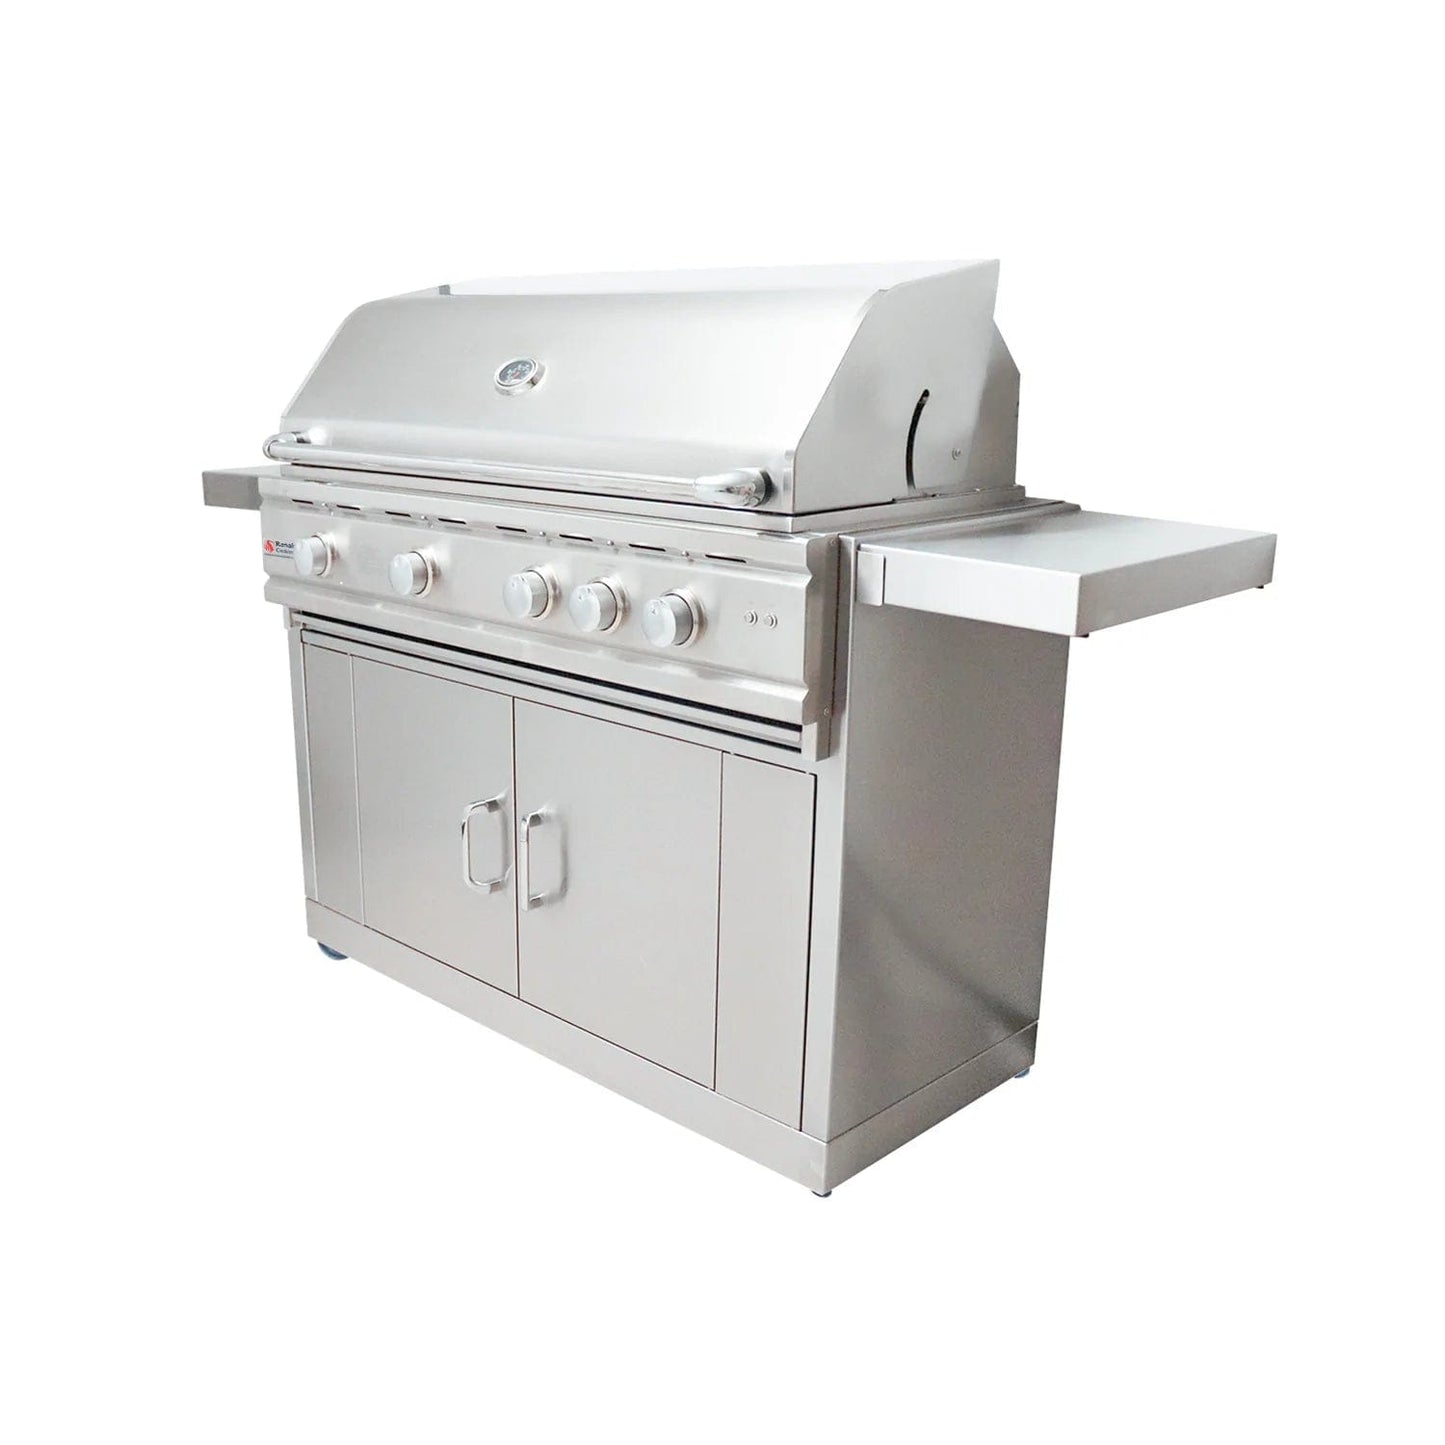 The Renaissance Cooking Systems - 42" Cutlass Pro Series Portable Grill - Kitchen King Direct